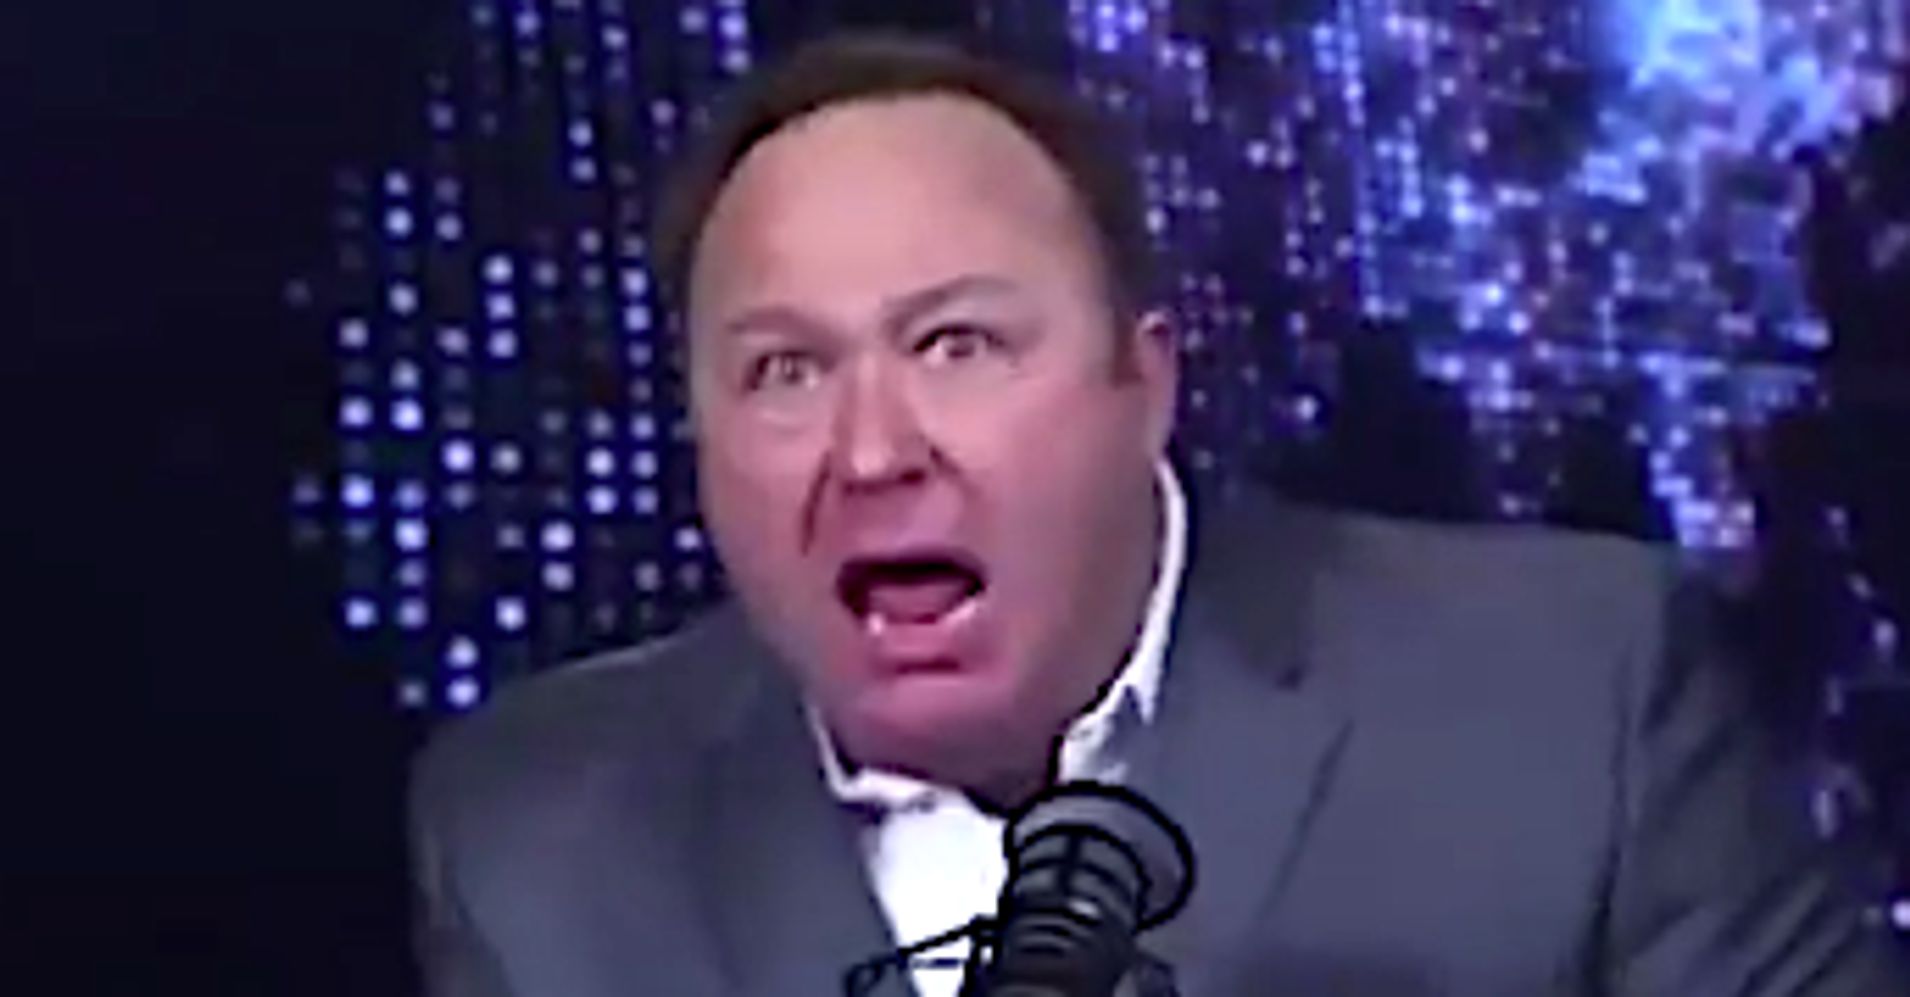 Montage Of Alex Jones Freaking Out, Then Apologizing Is Strangely